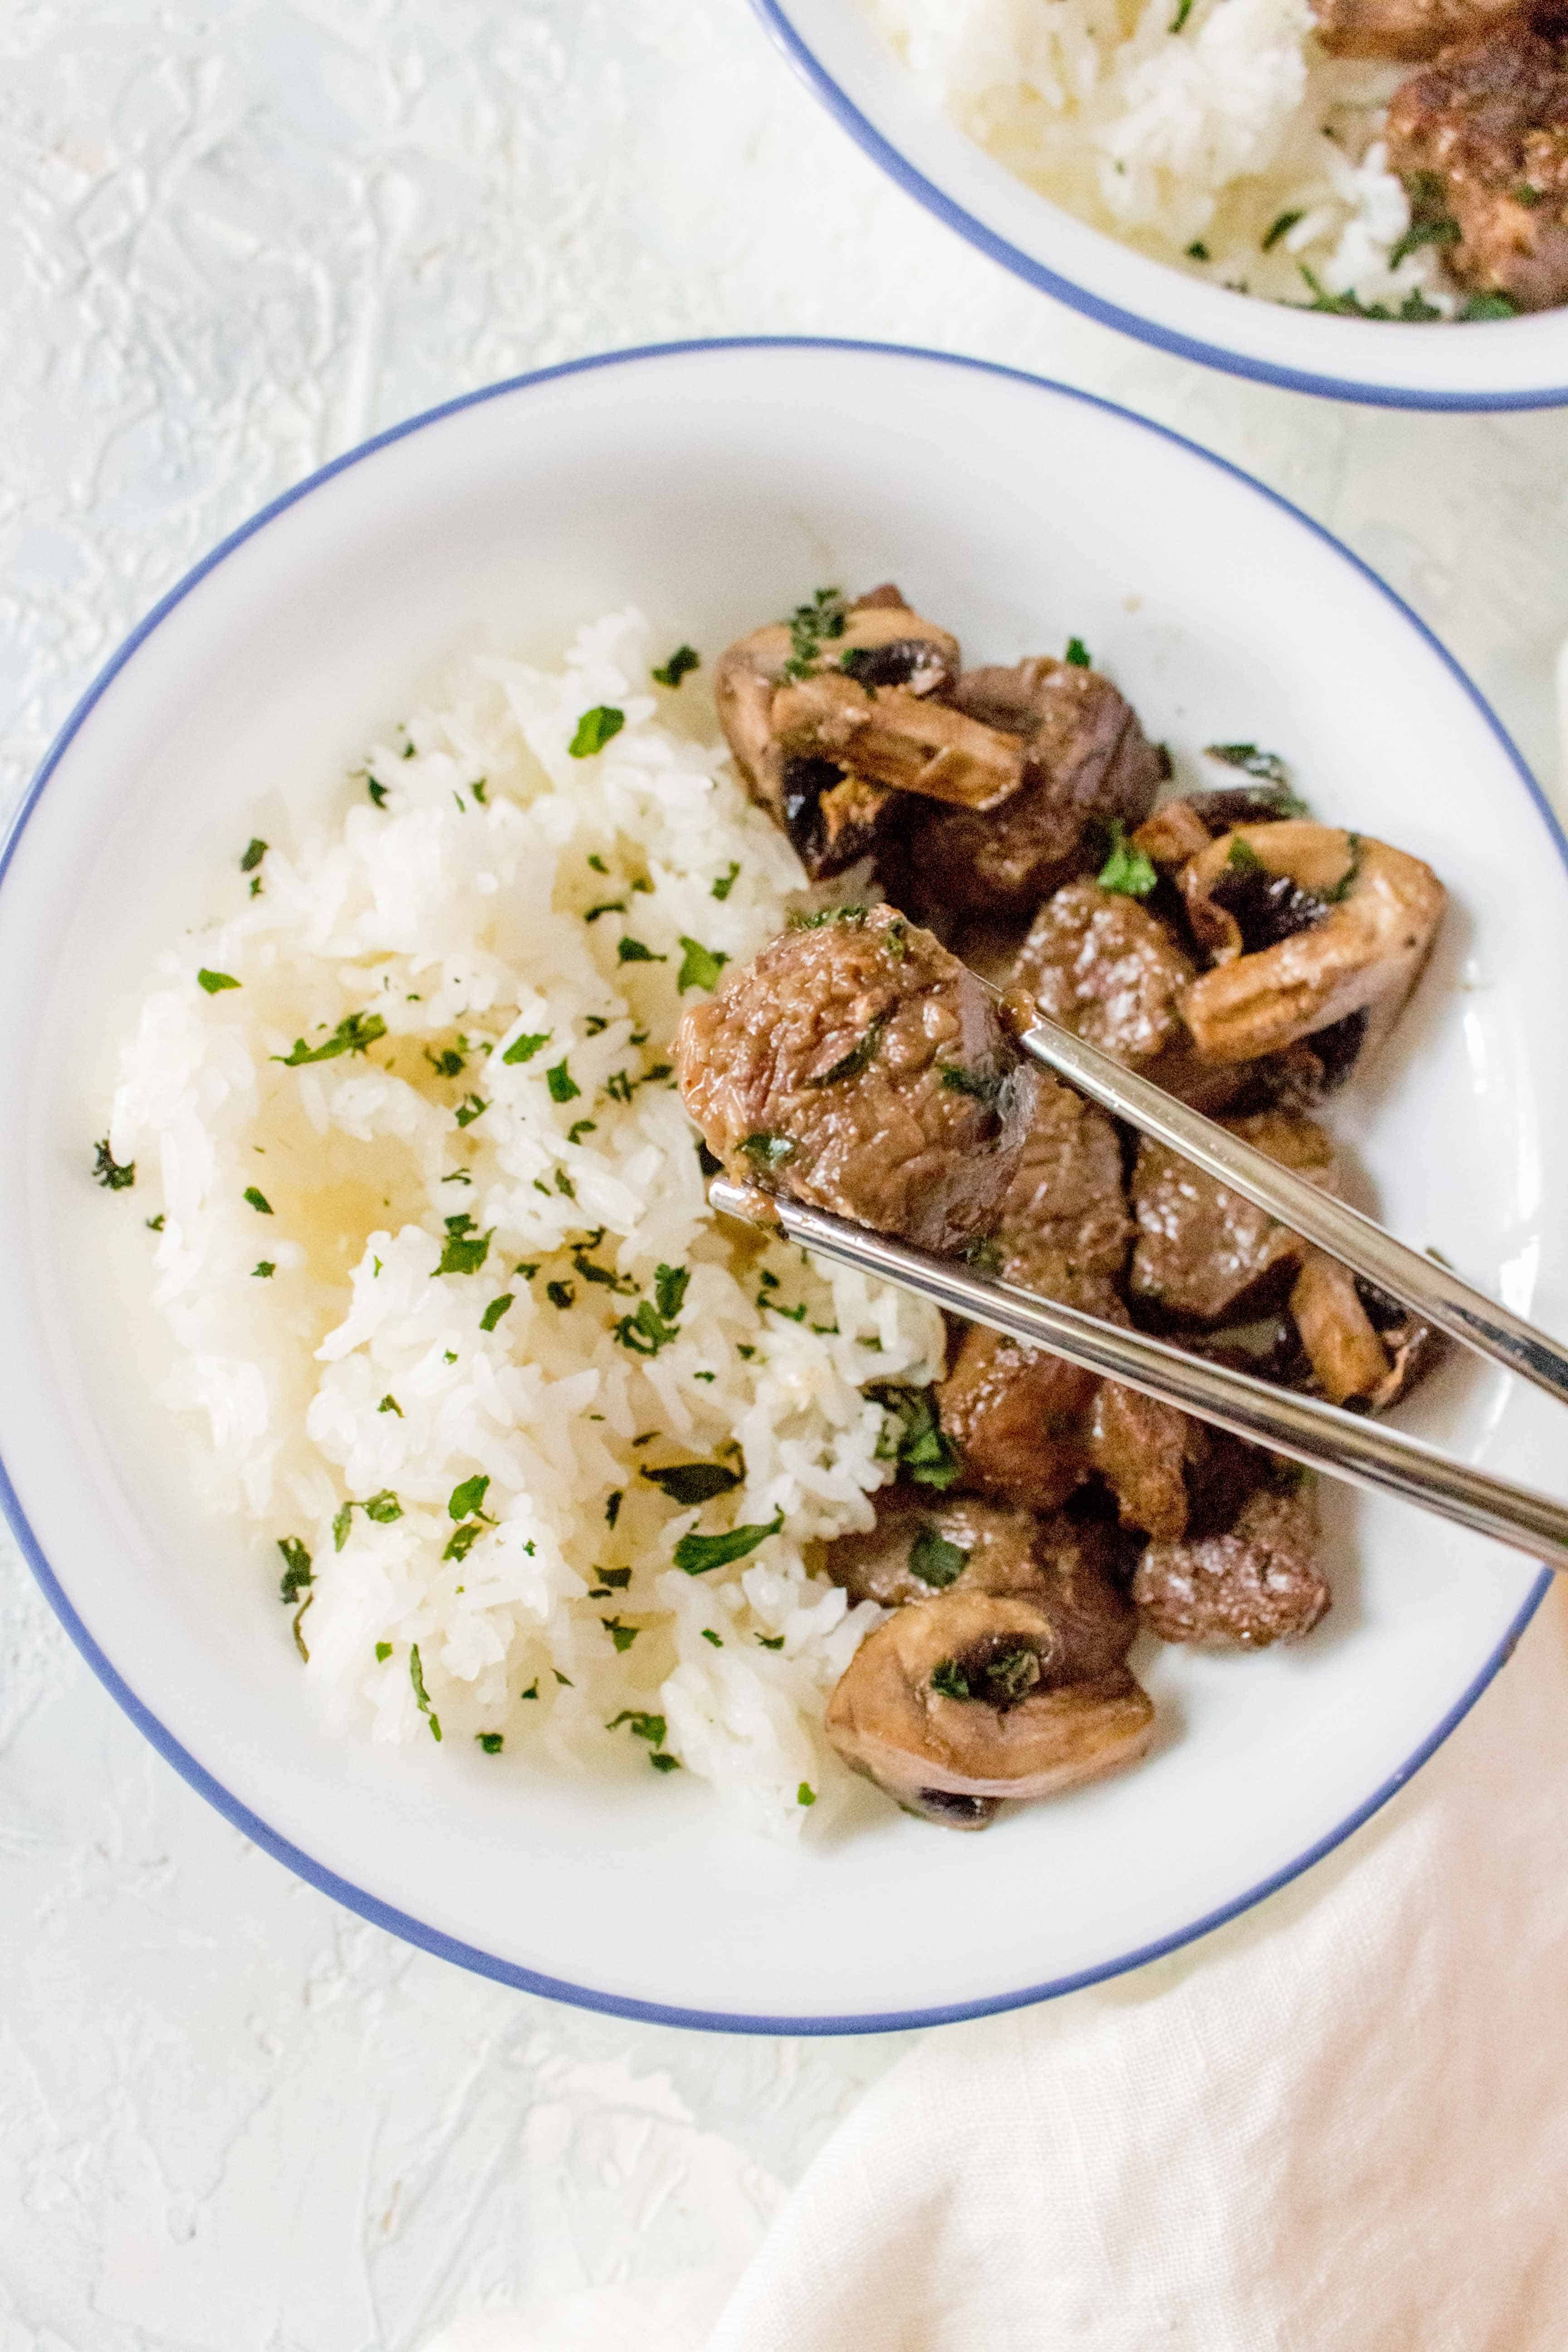 This Air Fryer Steak Bites and Mushroom recipe with a soy garlic marinade makes for the perfect quick different or as a meal prep for the week!